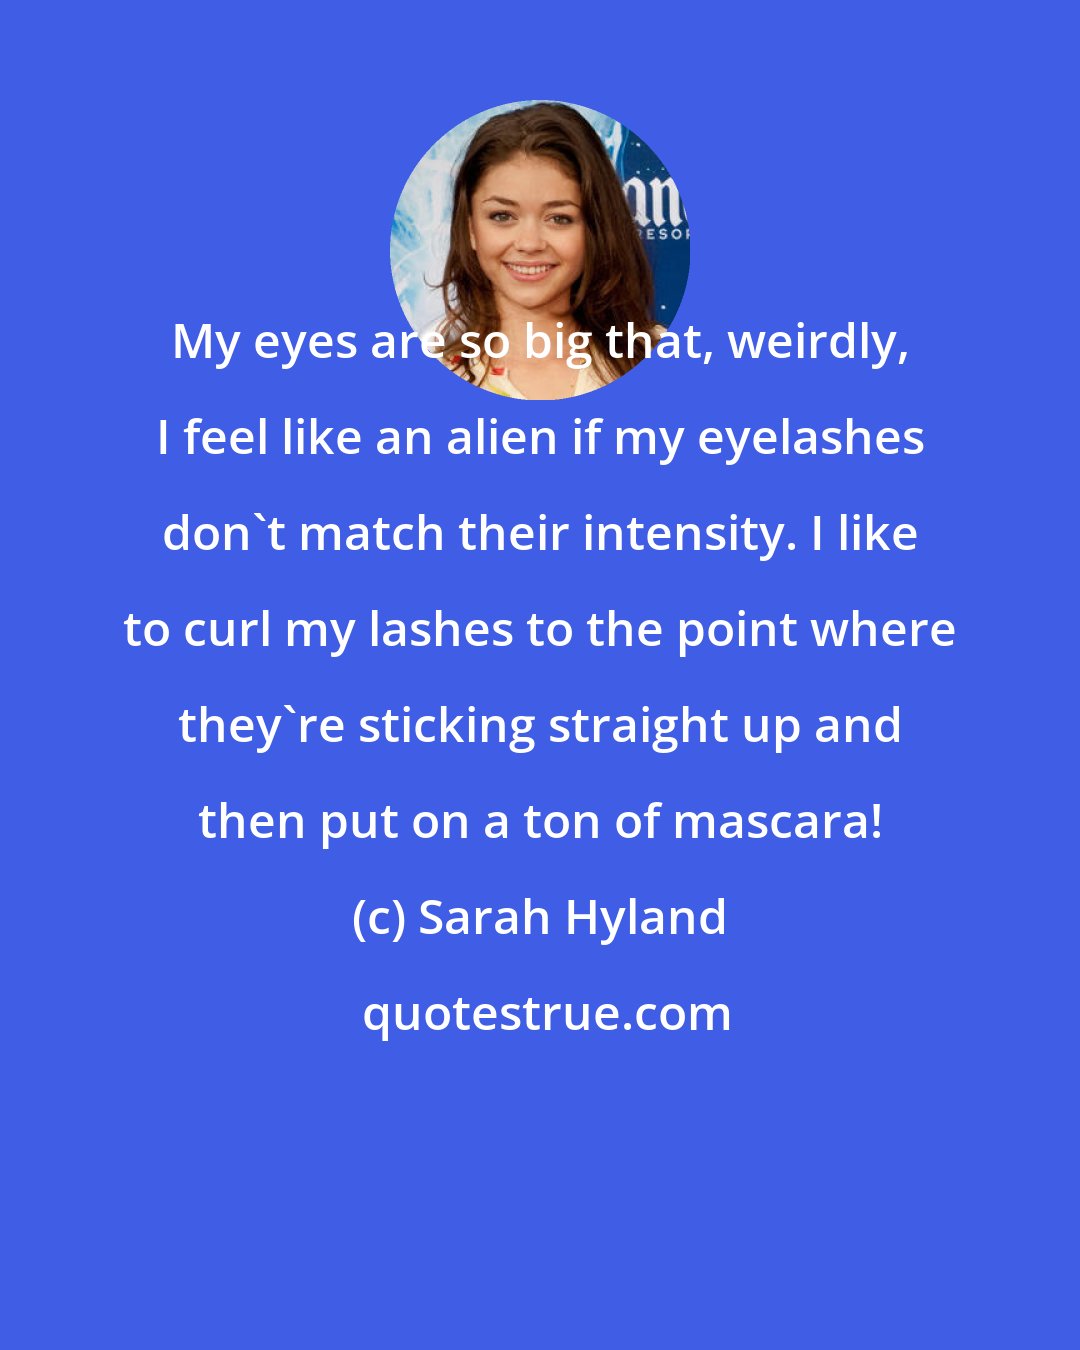 Sarah Hyland: My eyes are so big that, weirdly, I feel like an alien if my eyelashes don't match their intensity. I like to curl my lashes to the point where they're sticking straight up and then put on a ton of mascara!